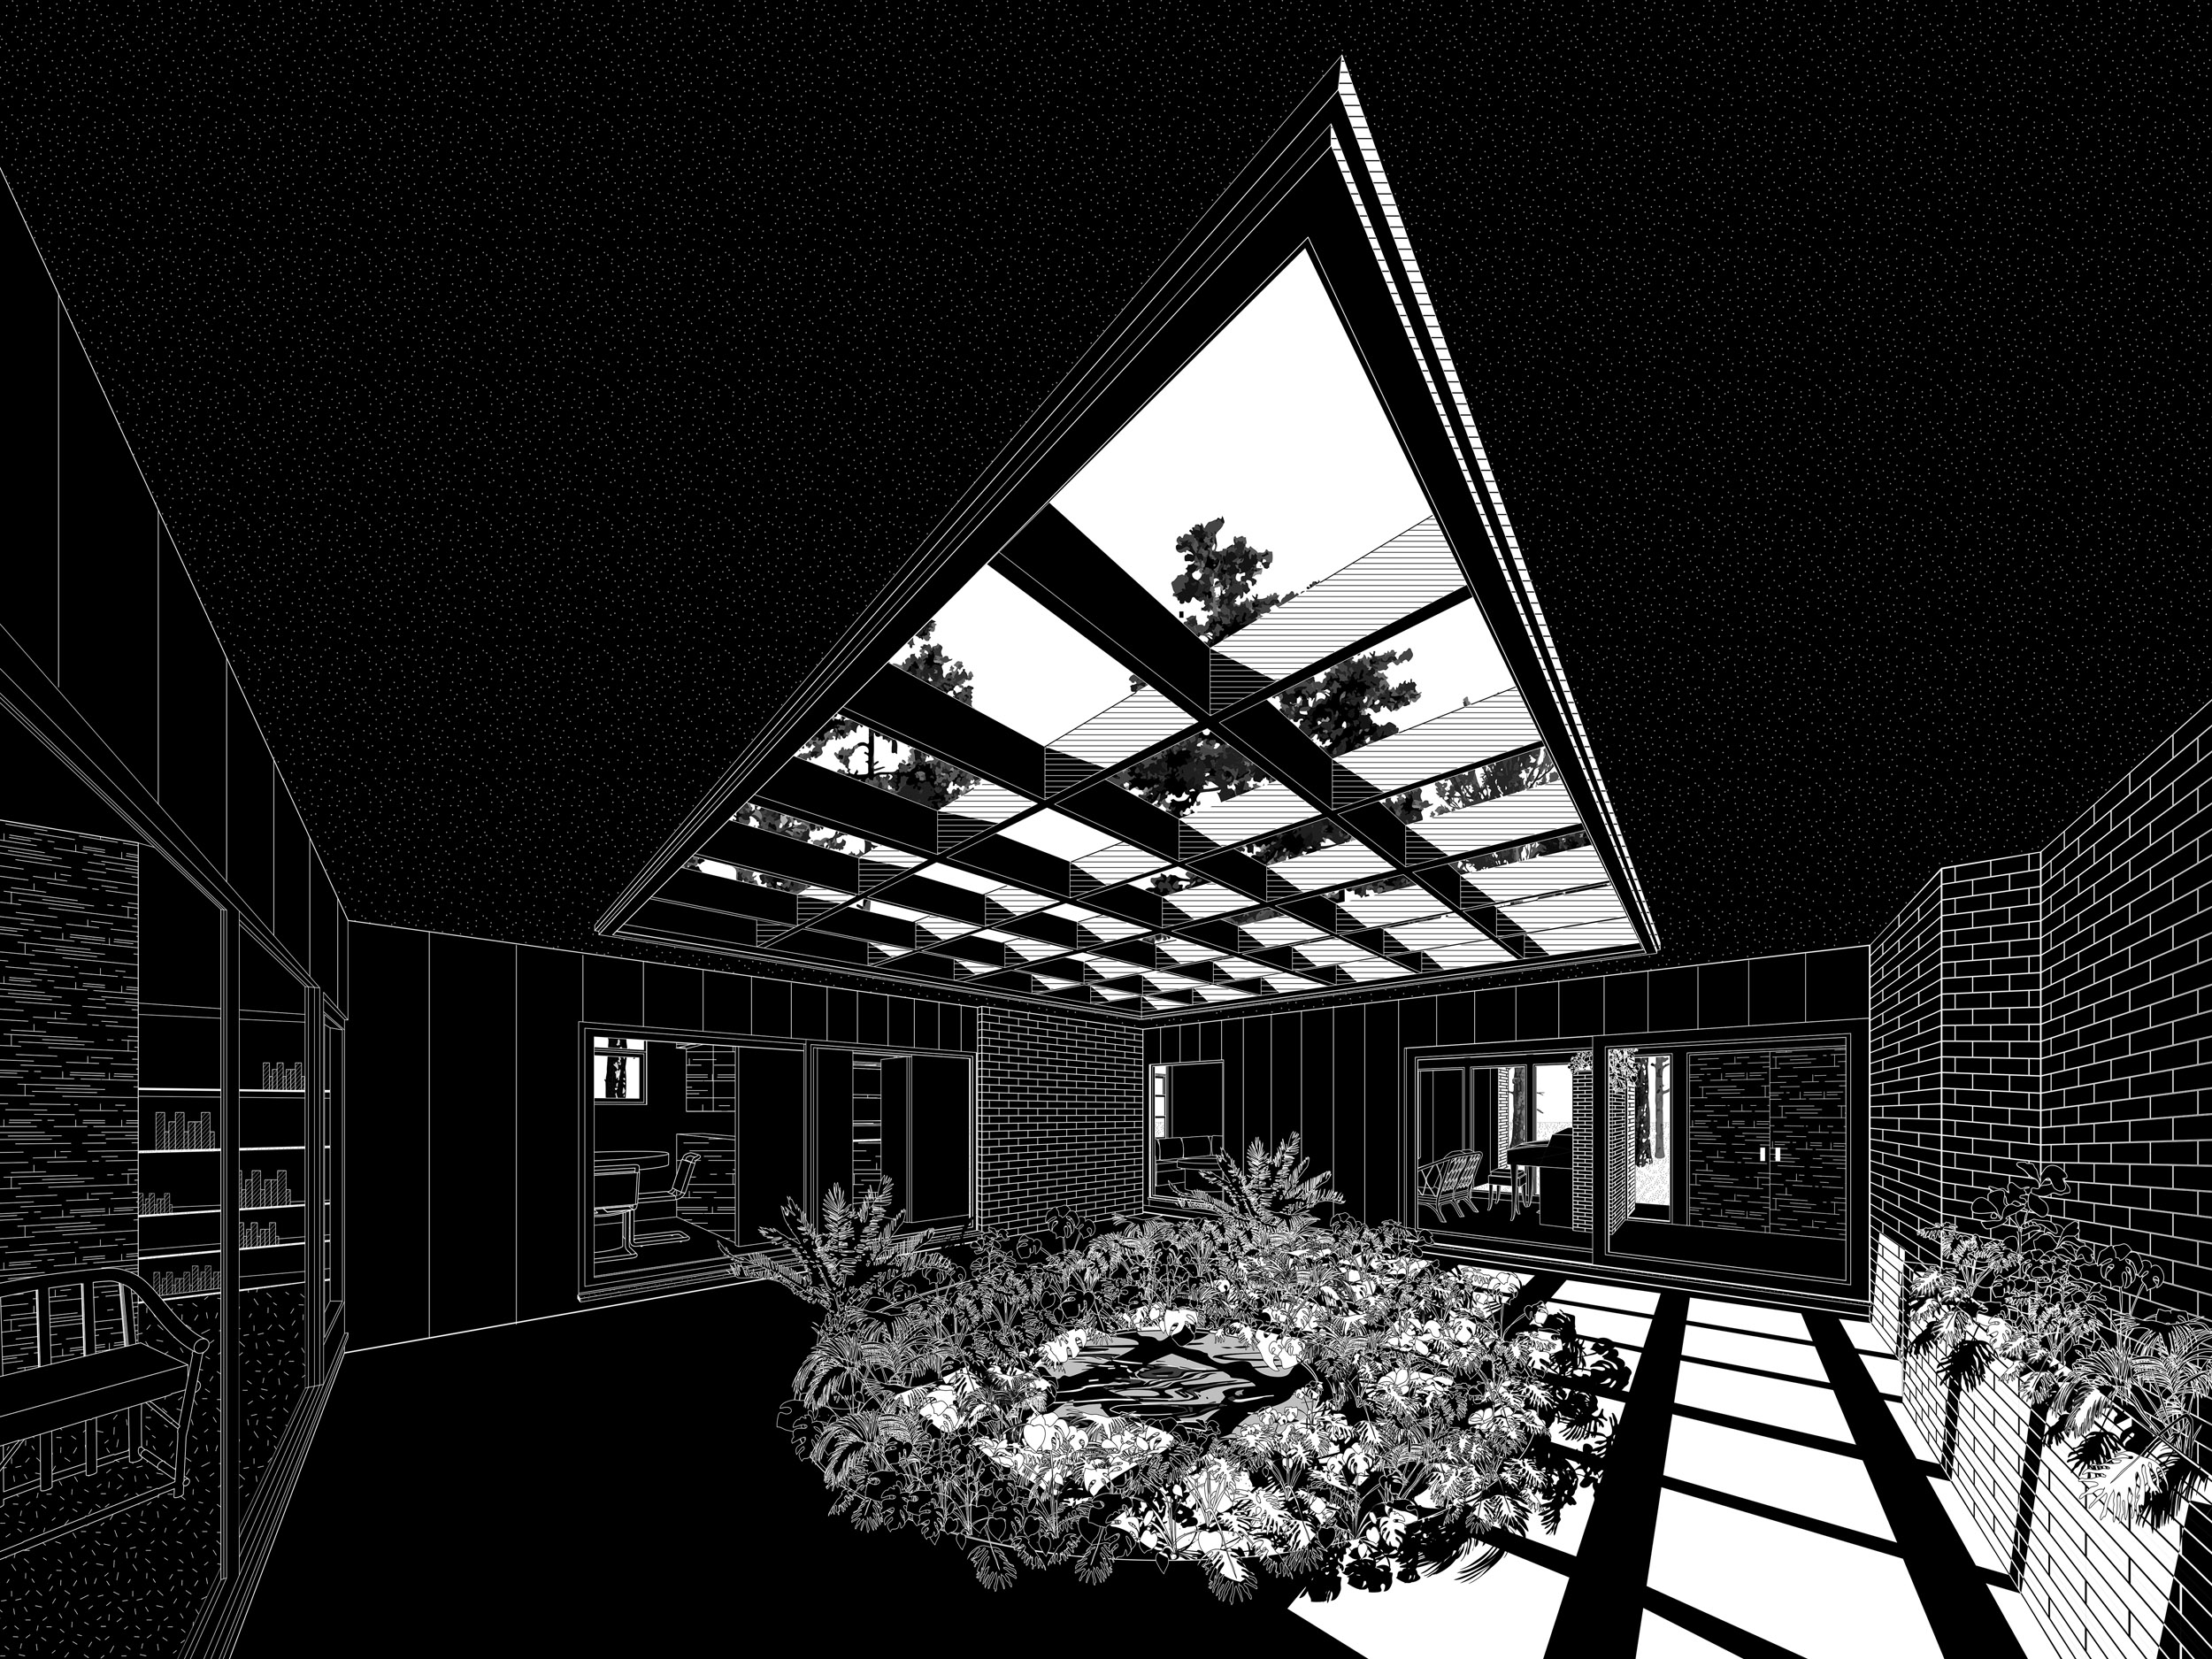 black-and-white perspective architectural drawing depicting a residential courtyard with plants, brick, and other details